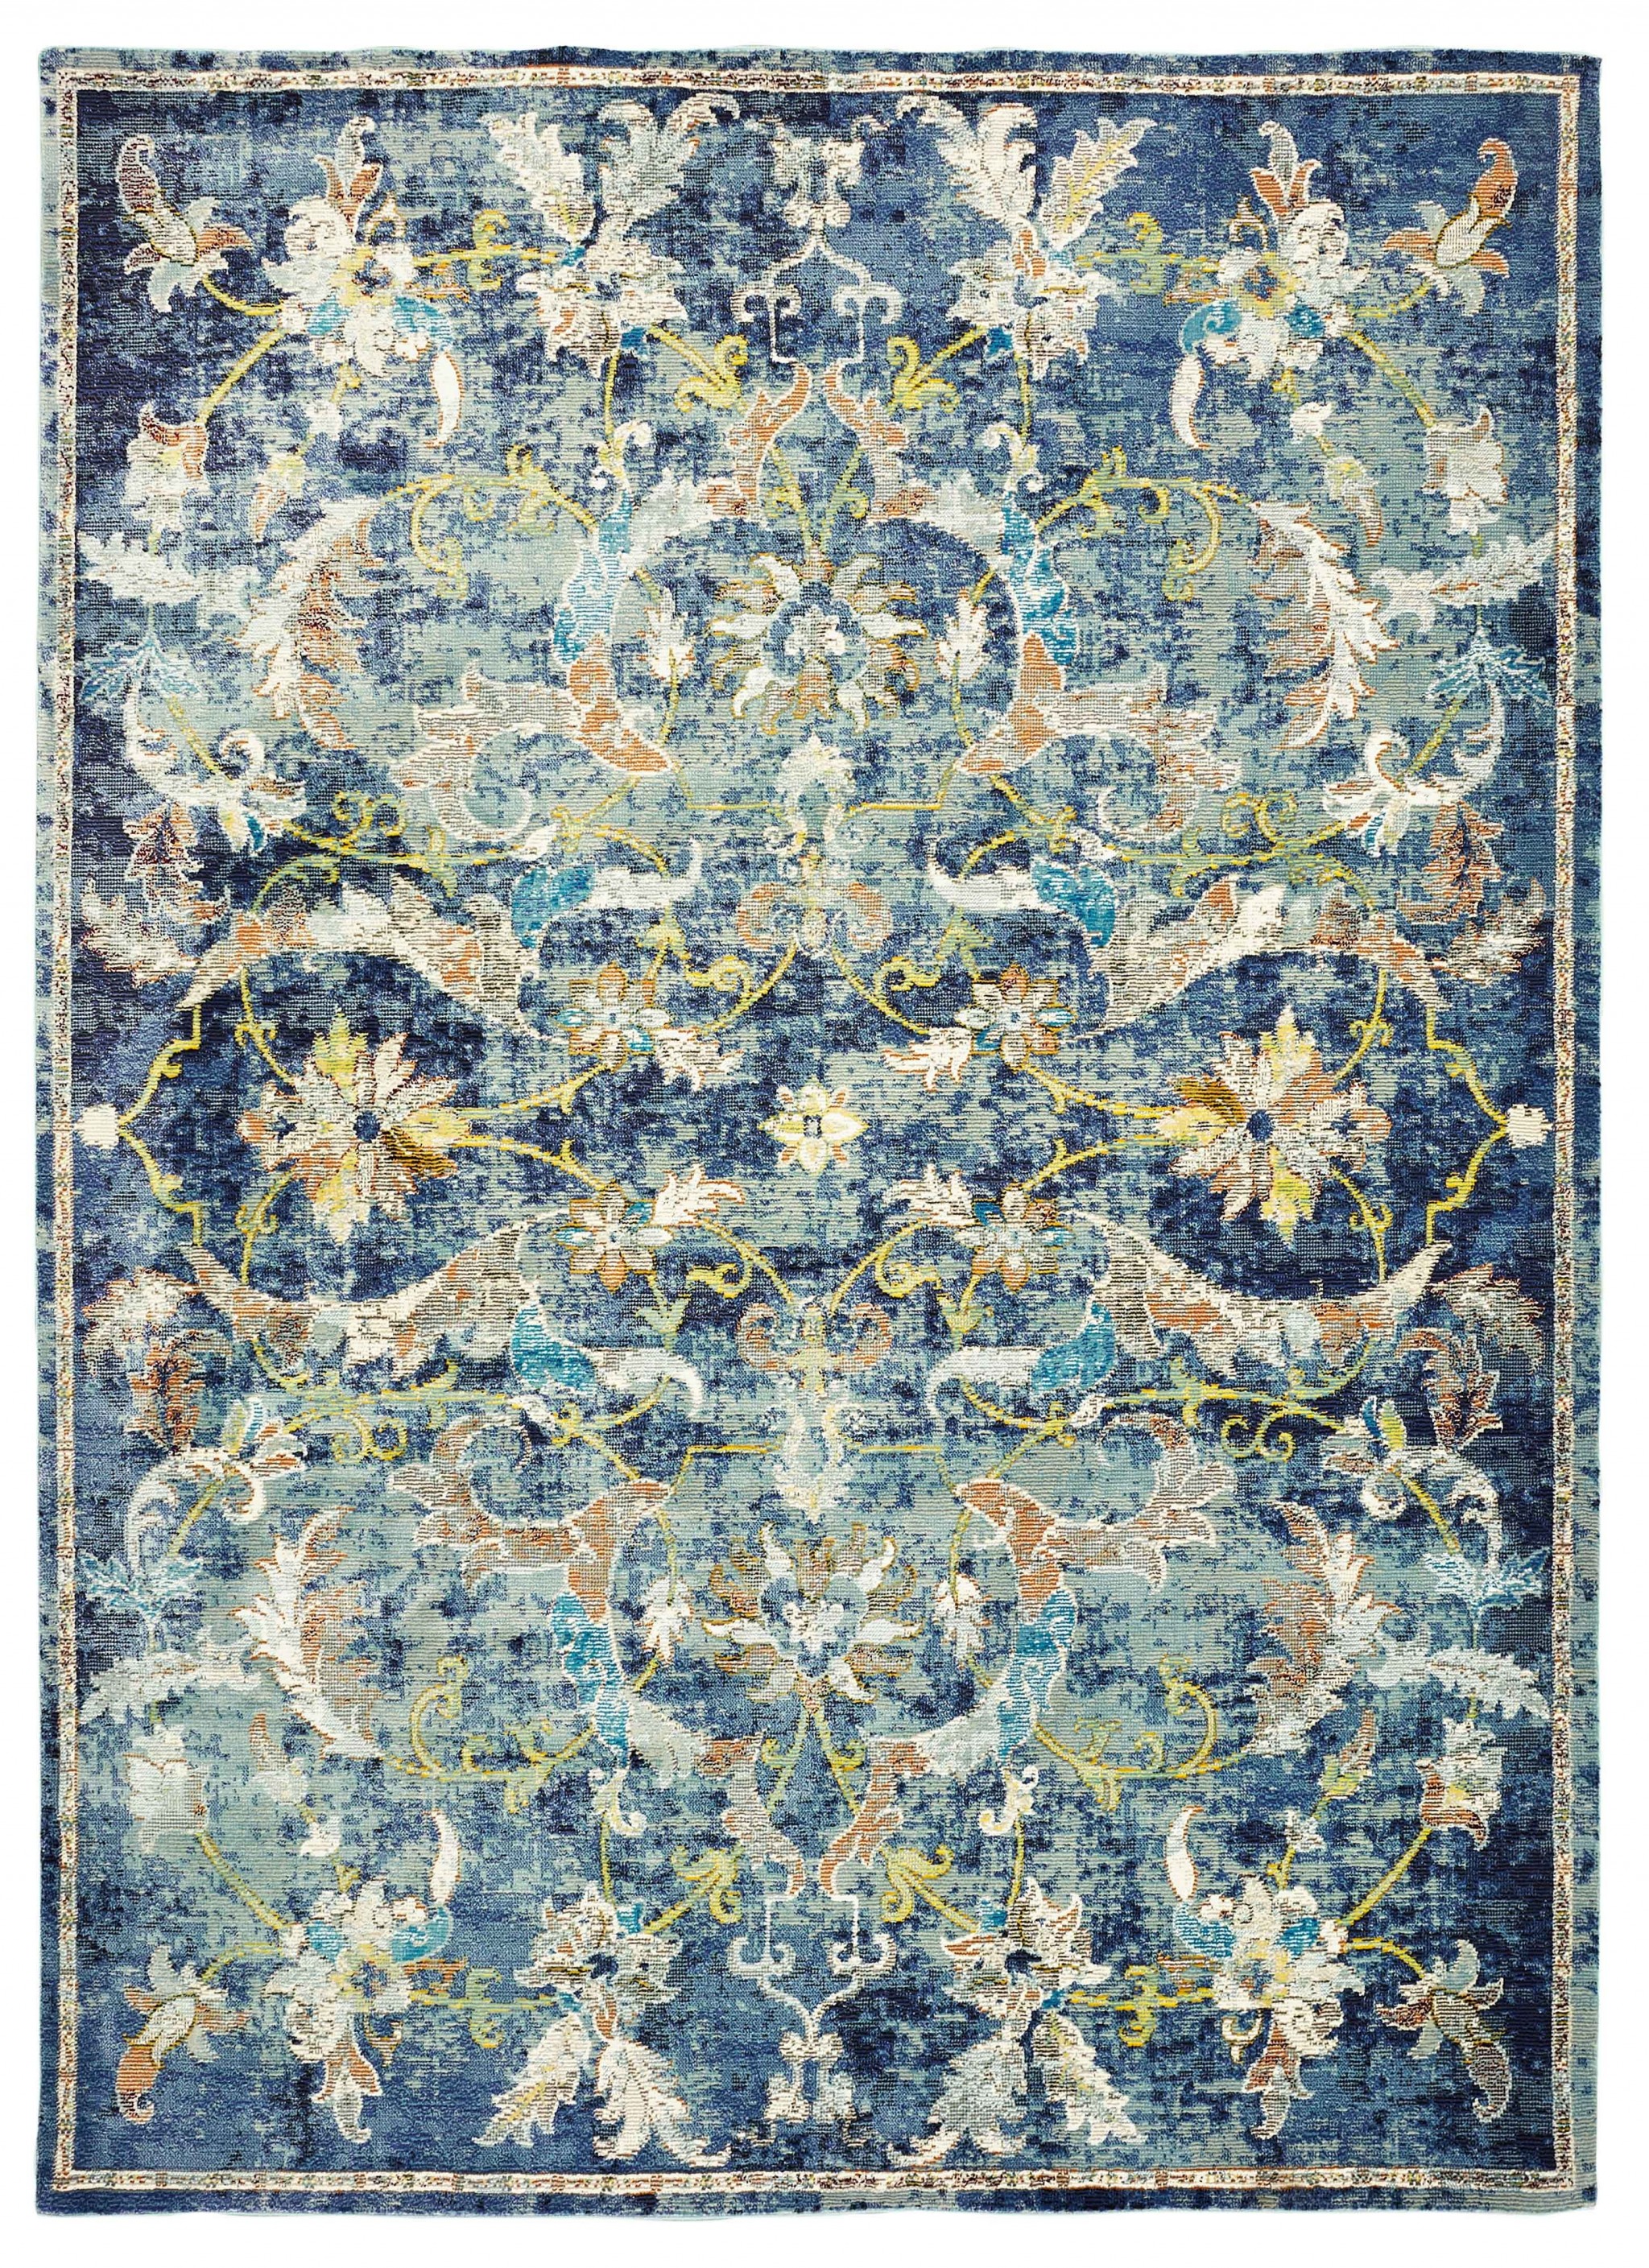 9’ x 12’ Blue and White Jacobean Pattern Area Rug-395707-1